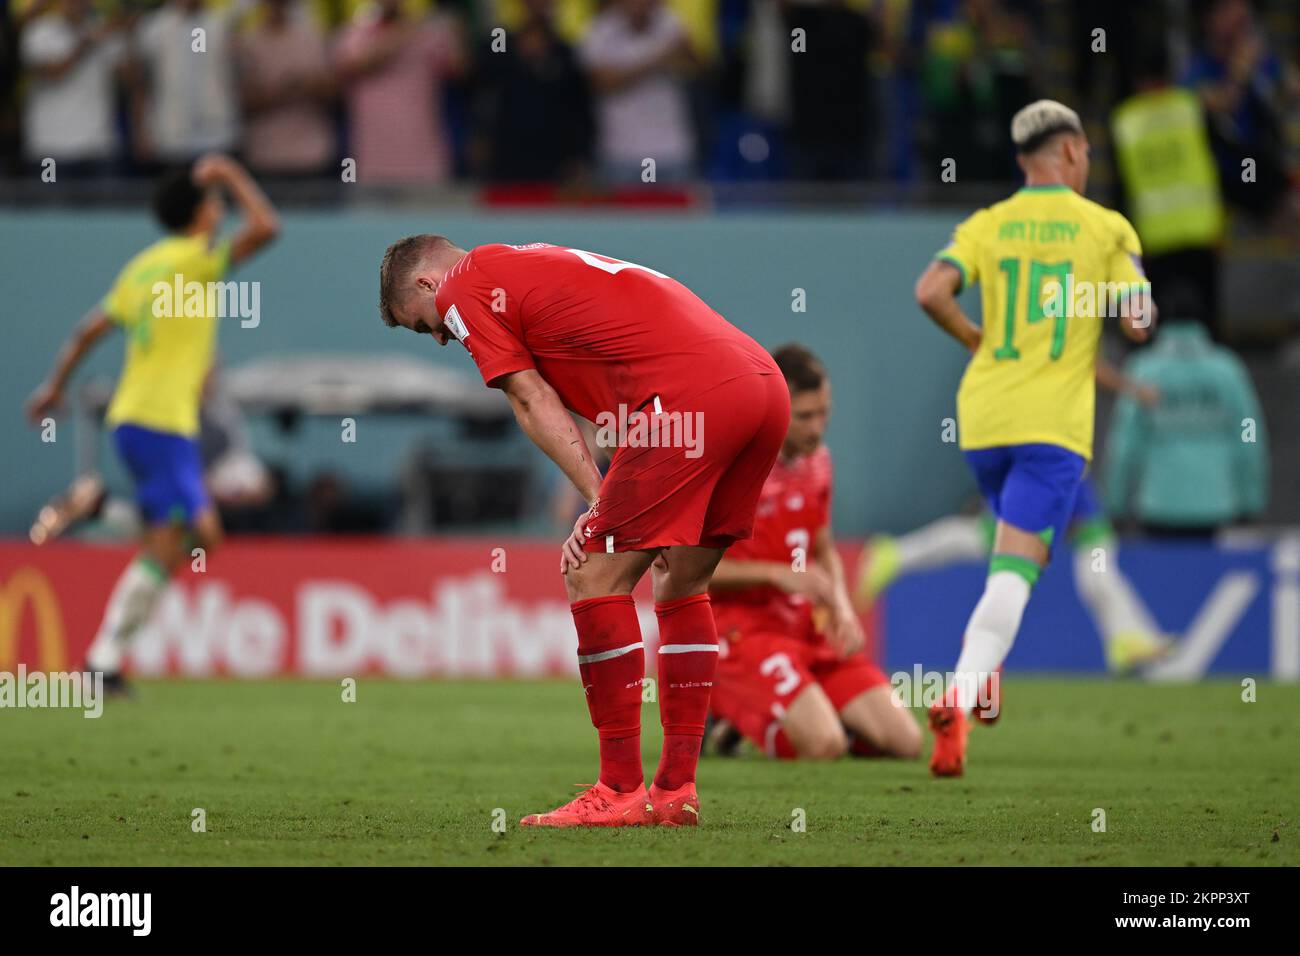 Doha, Qatar. 28th Nov, 2022. Soccer, World Cup 2022 in Qatar, Brazil - Switzerland, Preliminary Round, Group G, Matchday 2, at Stadium 974, Nico Elvedi of Switzerland props himself up after conceding a goal while Brazil's players turn away in jubilation. Credit: Federico Gambarini/dpa/Alamy Live News Credit: dpa picture alliance/Alamy Live News Stock Photo